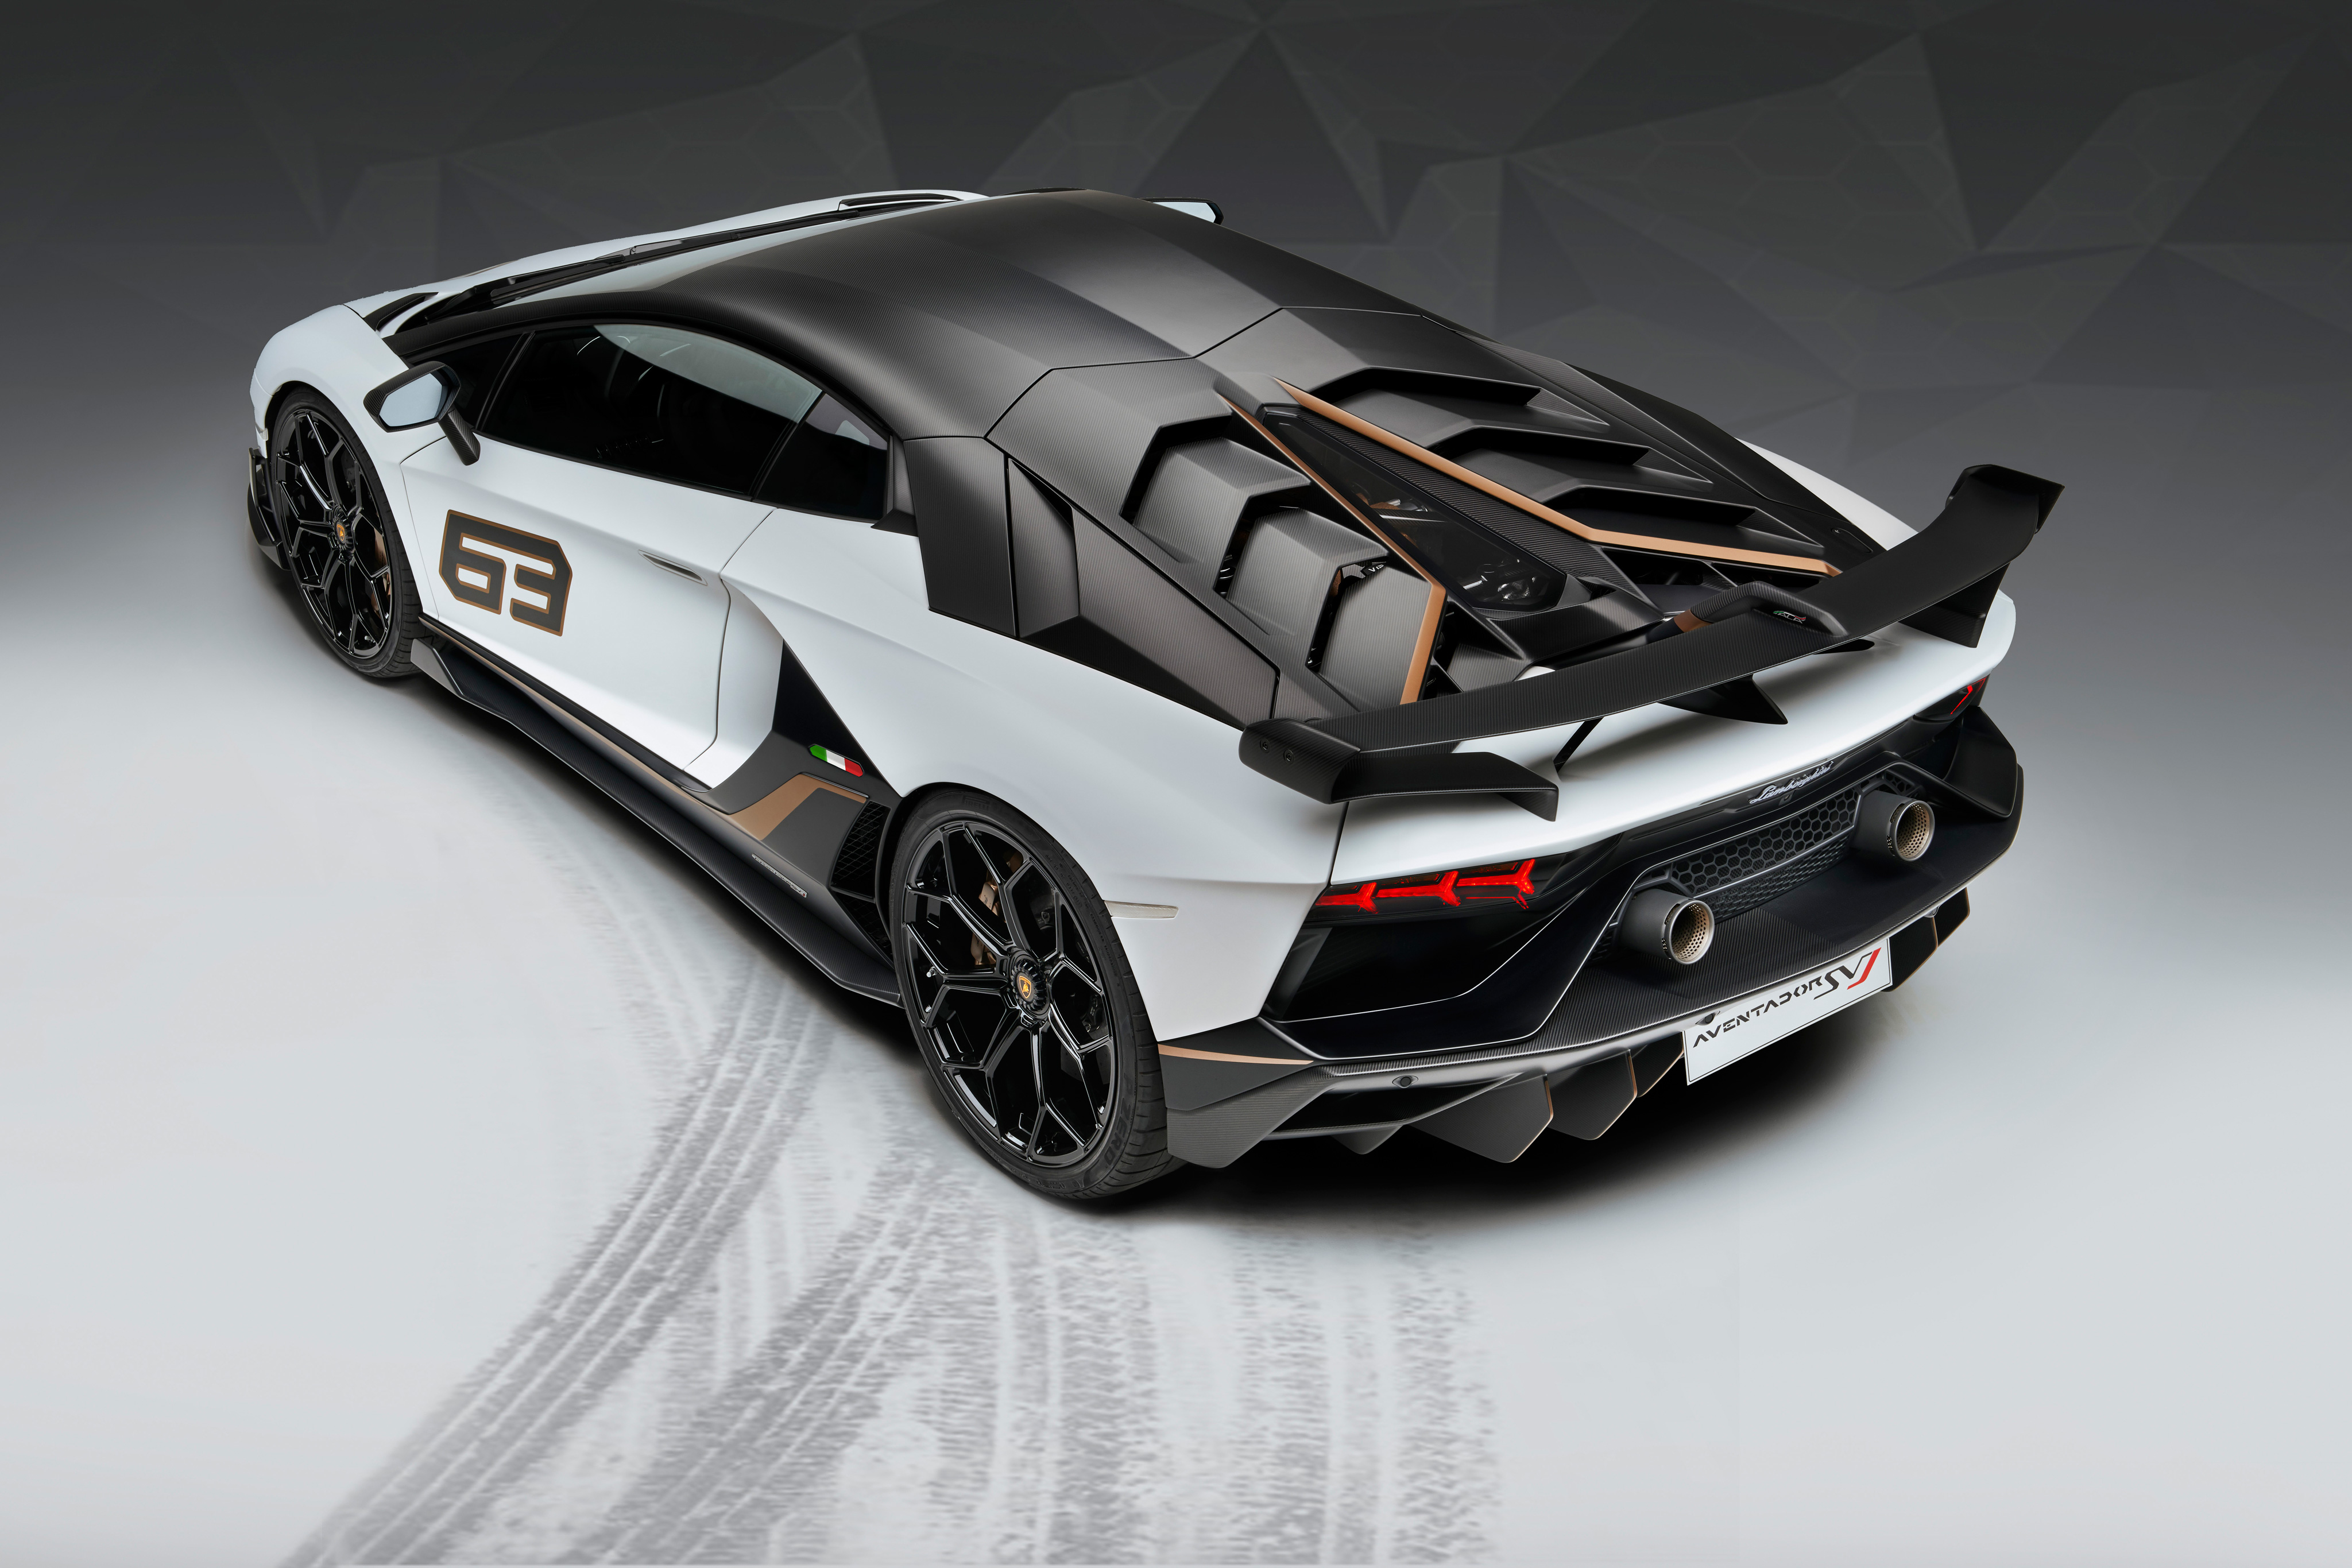 Wallpapers Lamborghini Aventador Svj 63 white car view from behind on the desktop